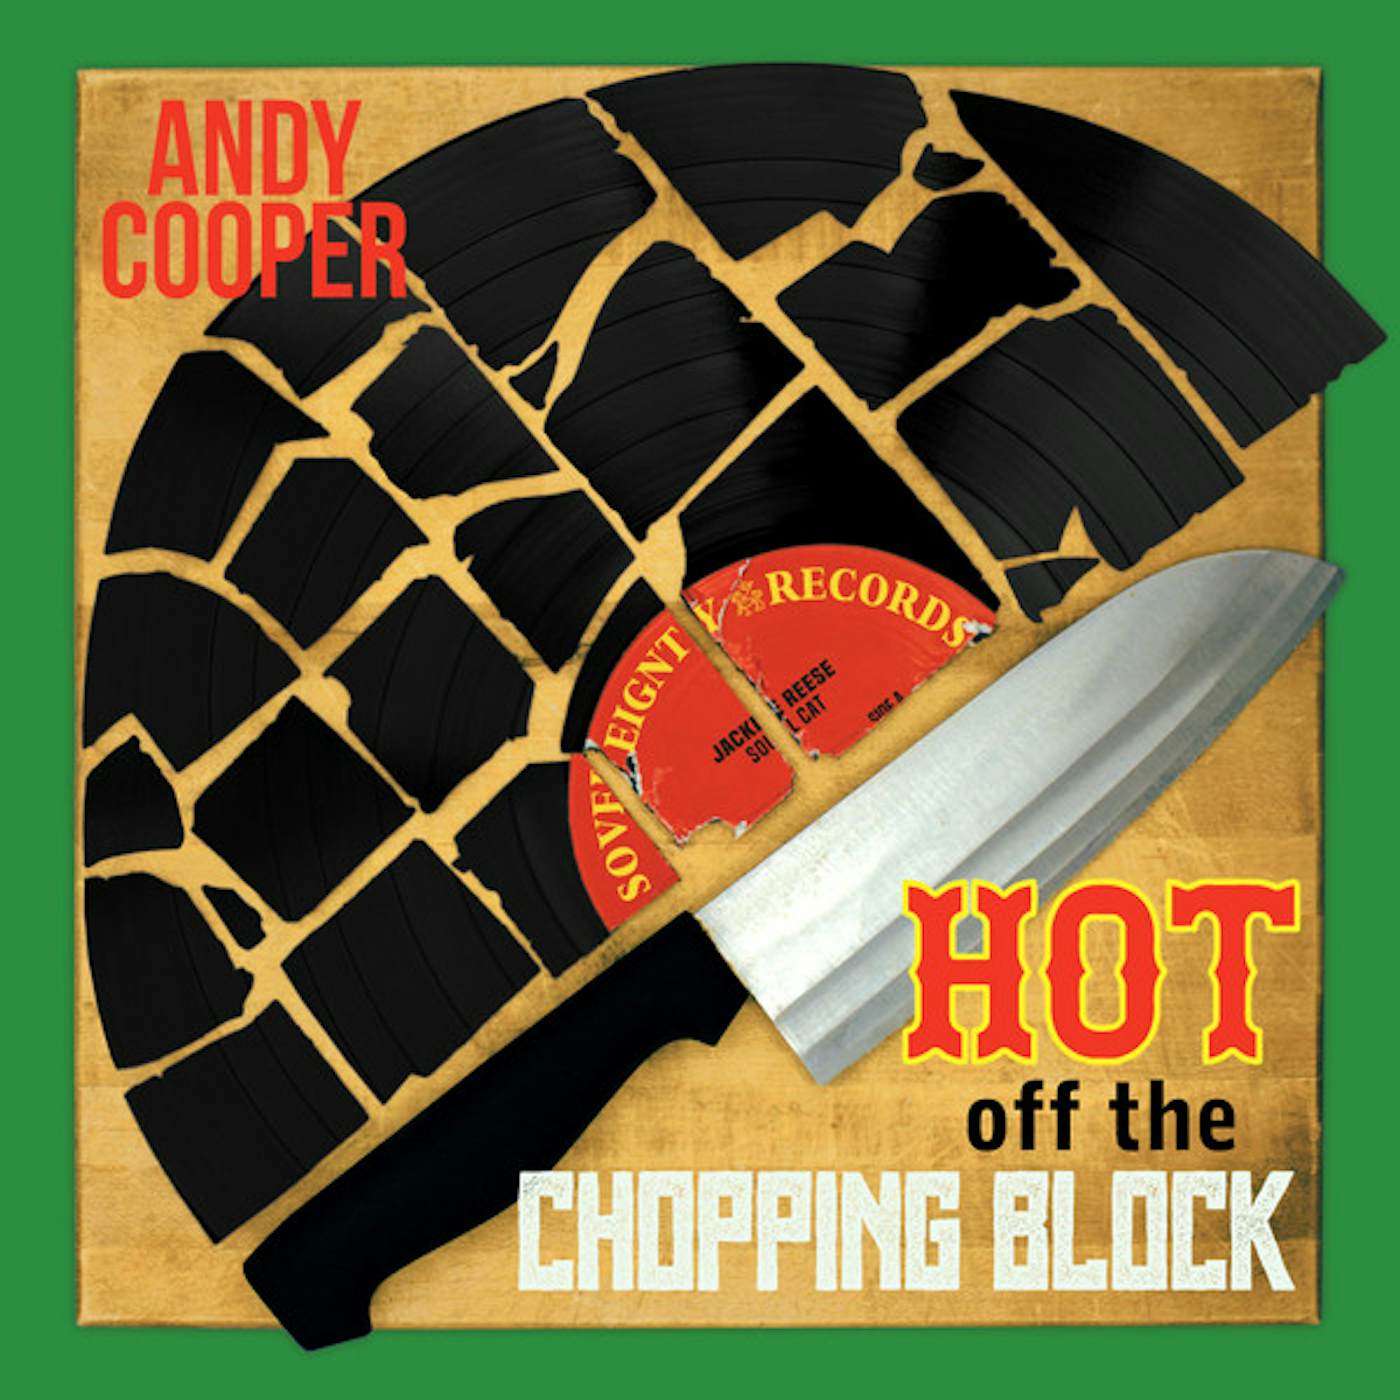 Andy Cooper Hot off the Chopping Block Vinyl Record